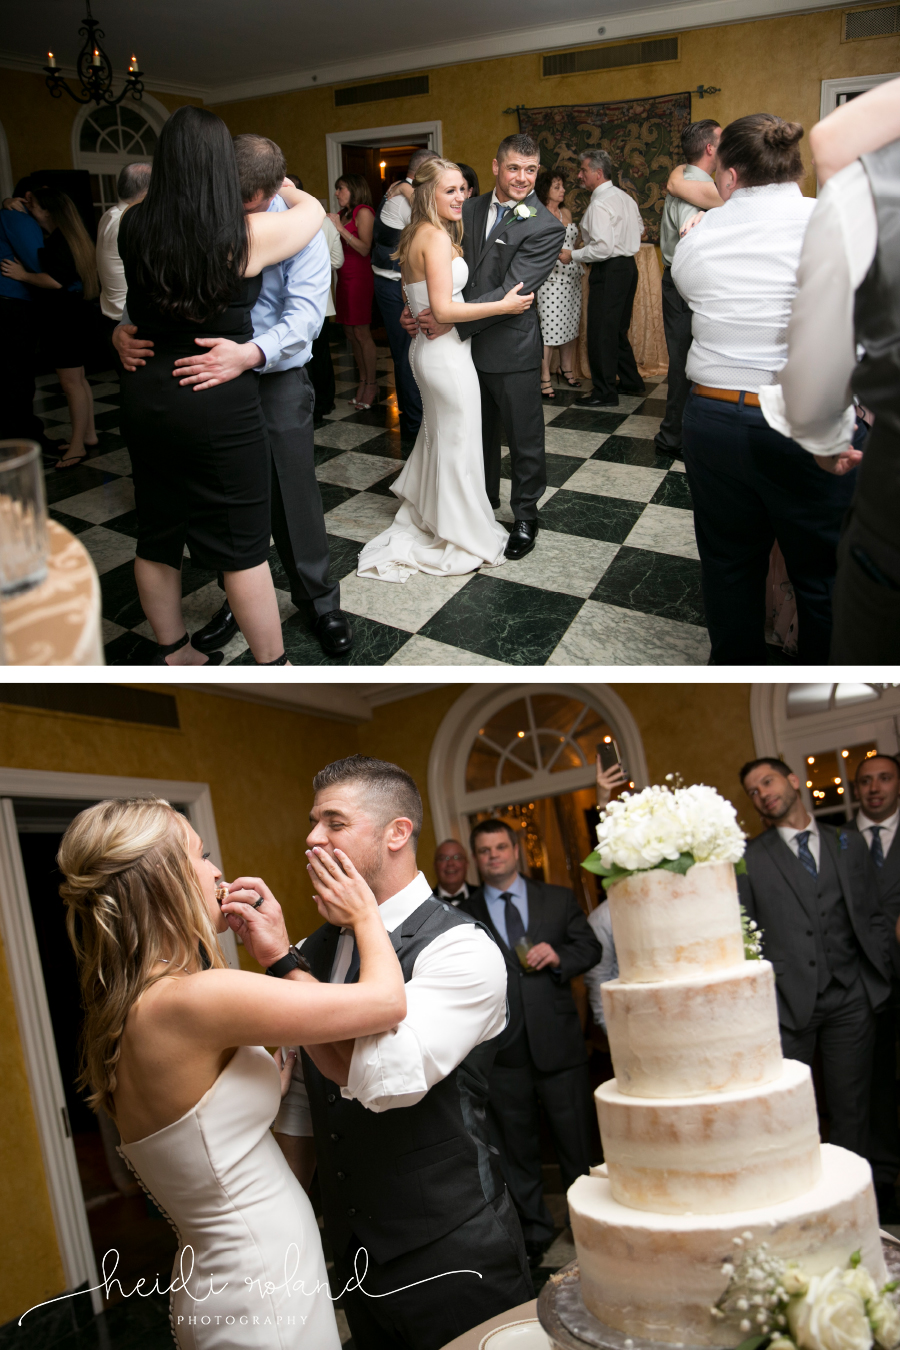 bride and groom cake cutting 